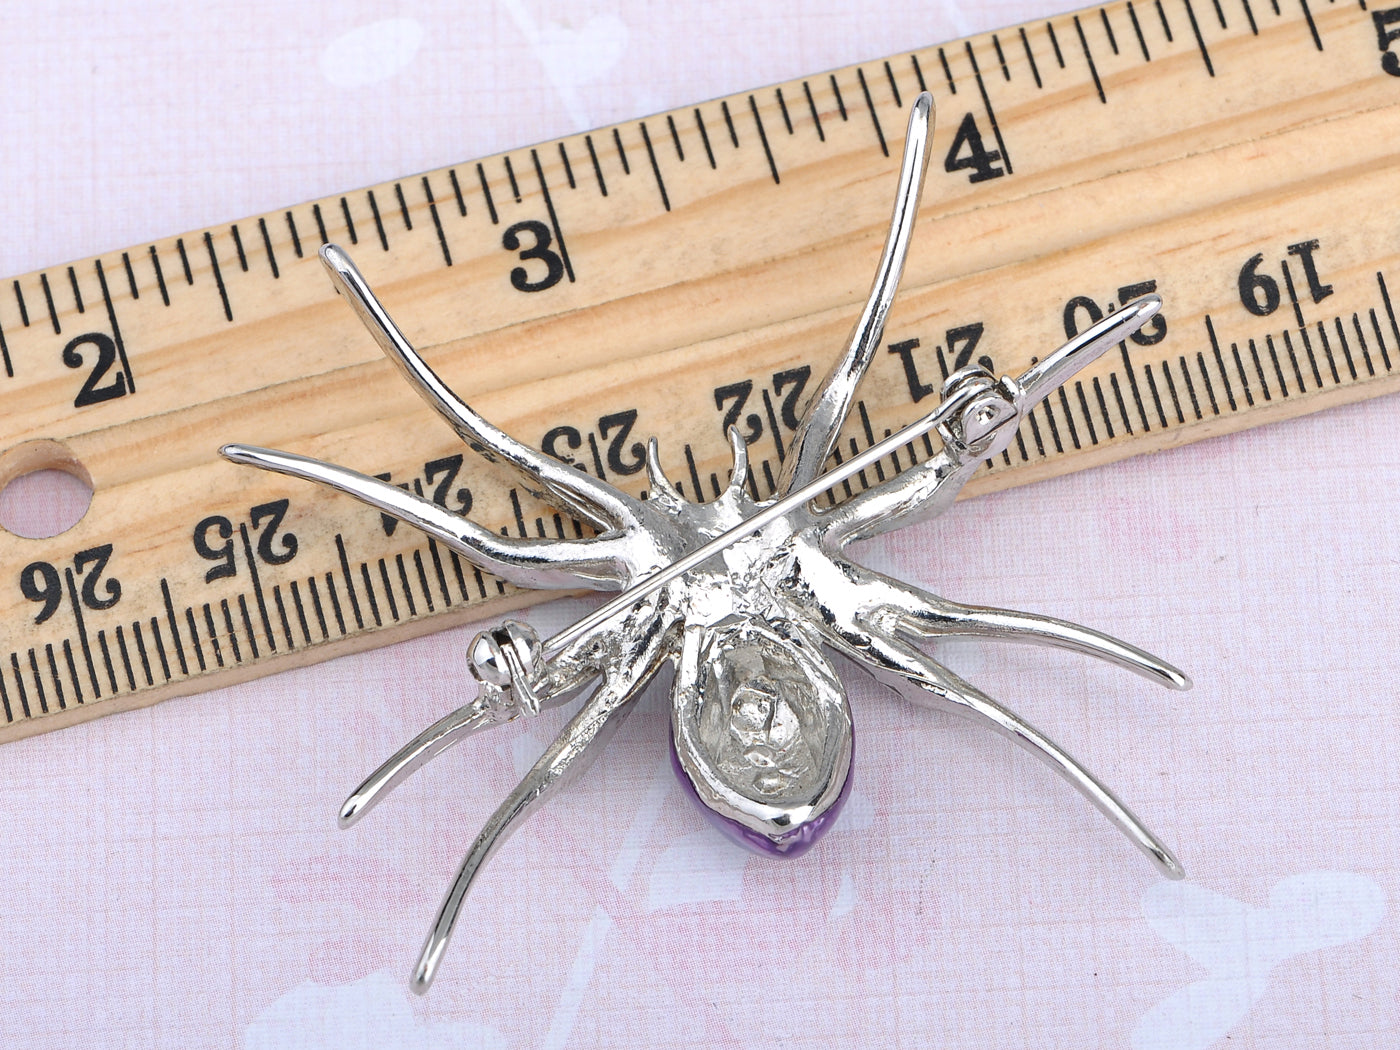 Amethyst Violet Cz Purple Belly Spider Bug Insect Pin Brooch